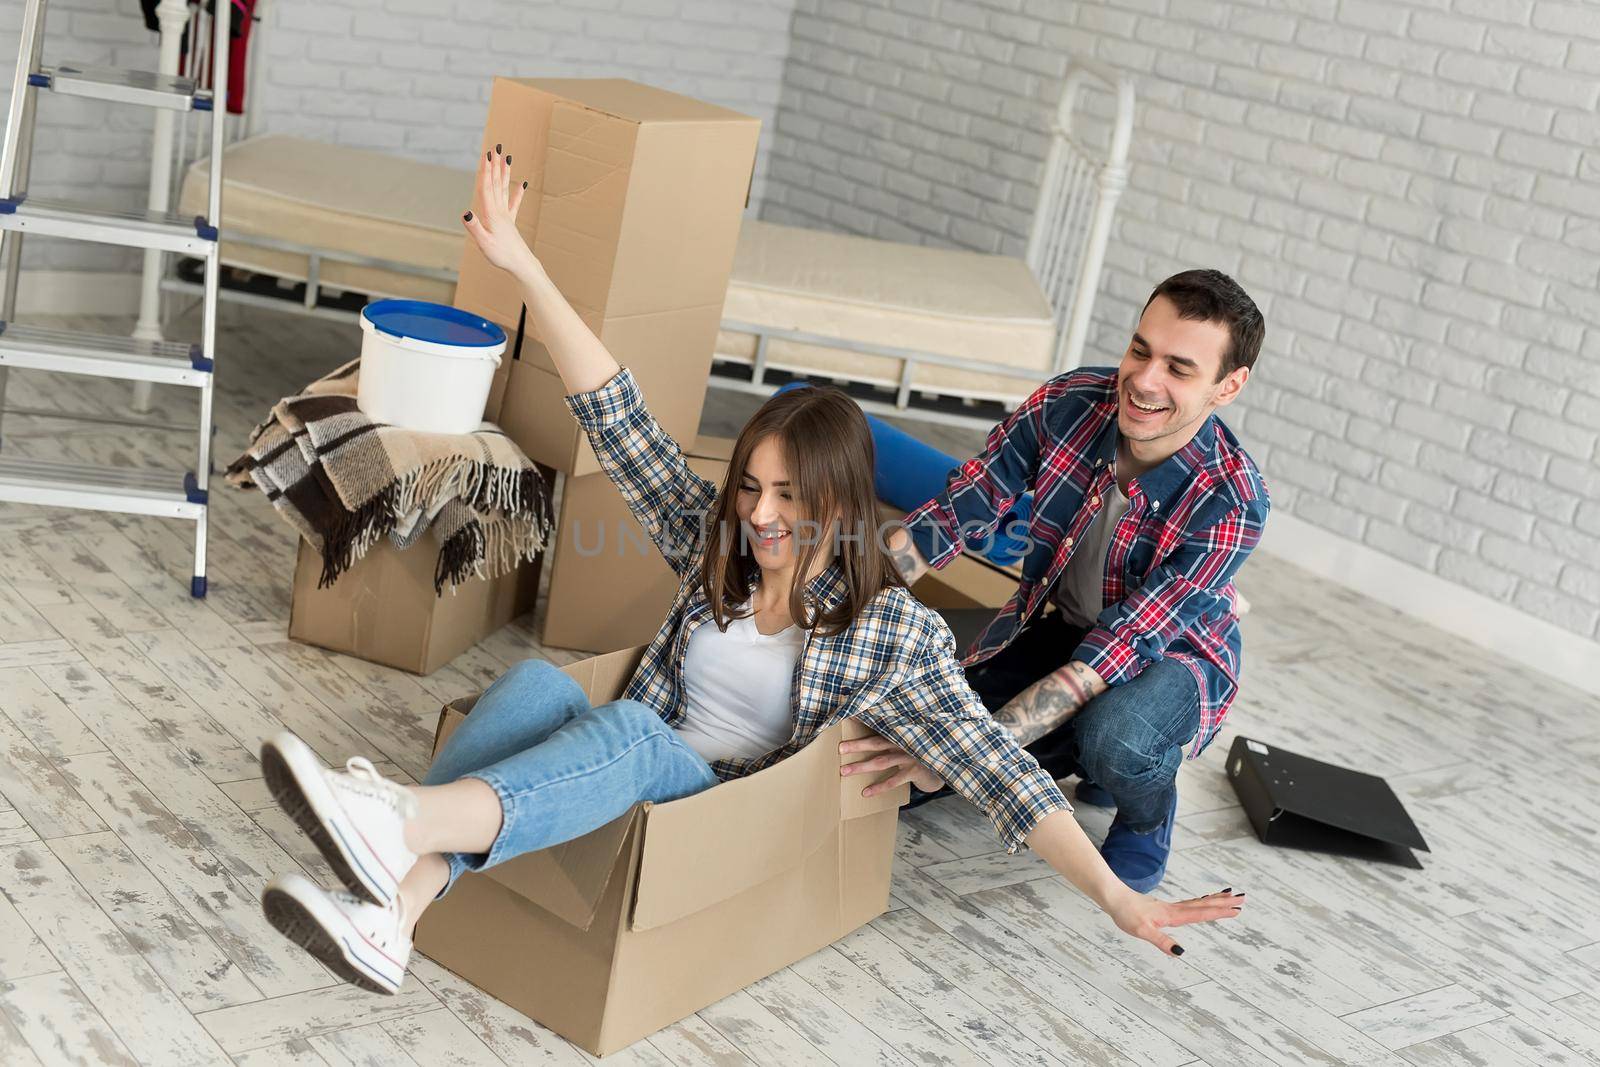 Happy couple having fun laughing moving into new home, young excited woman riding sitting in cardboard box while man pushing it, cheerful roommates playing while packing unpacking belongings together. by StudioPeace